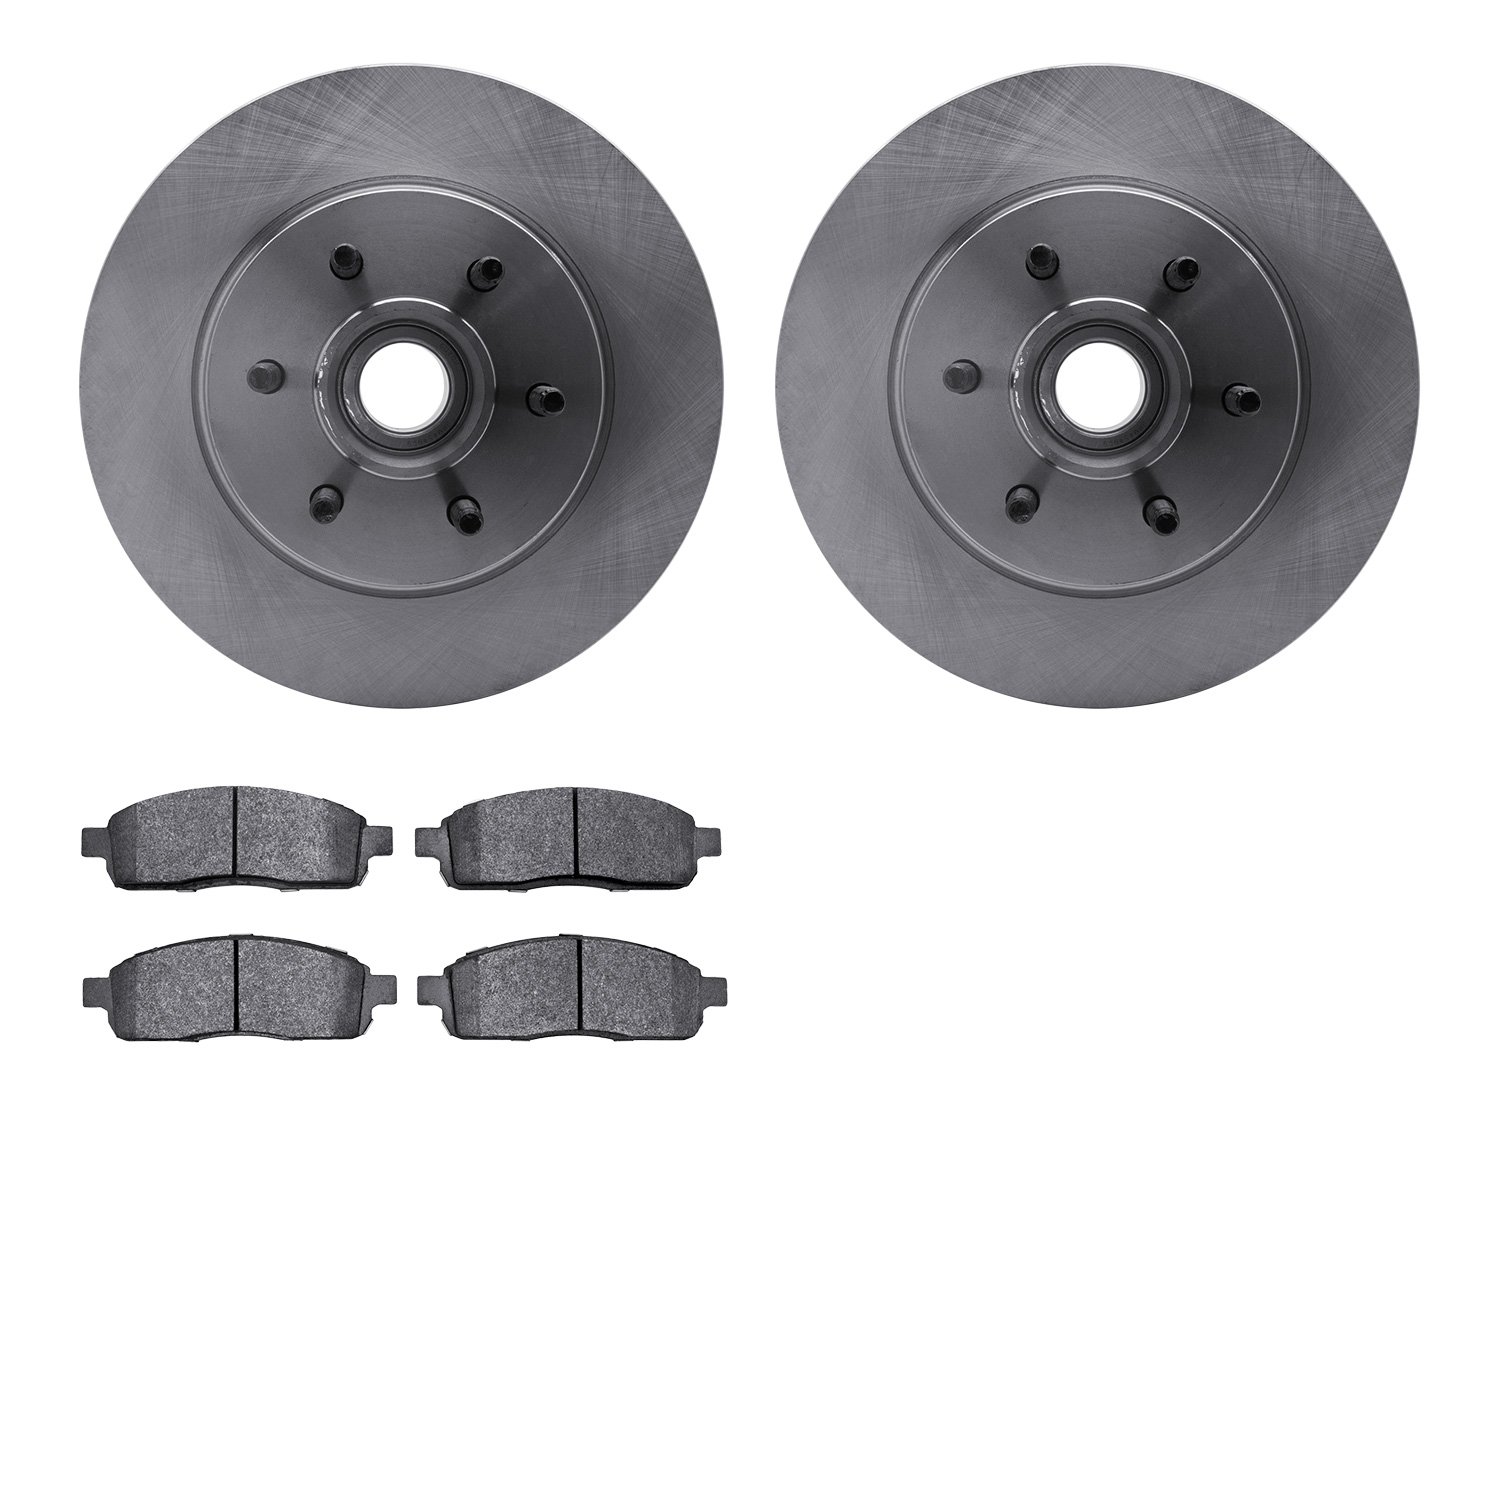 6402-54206 Brake Rotors with Ultimate-Duty Brake Pads, 2004-2008 Ford/Lincoln/Mercury/Mazda, Position: Front